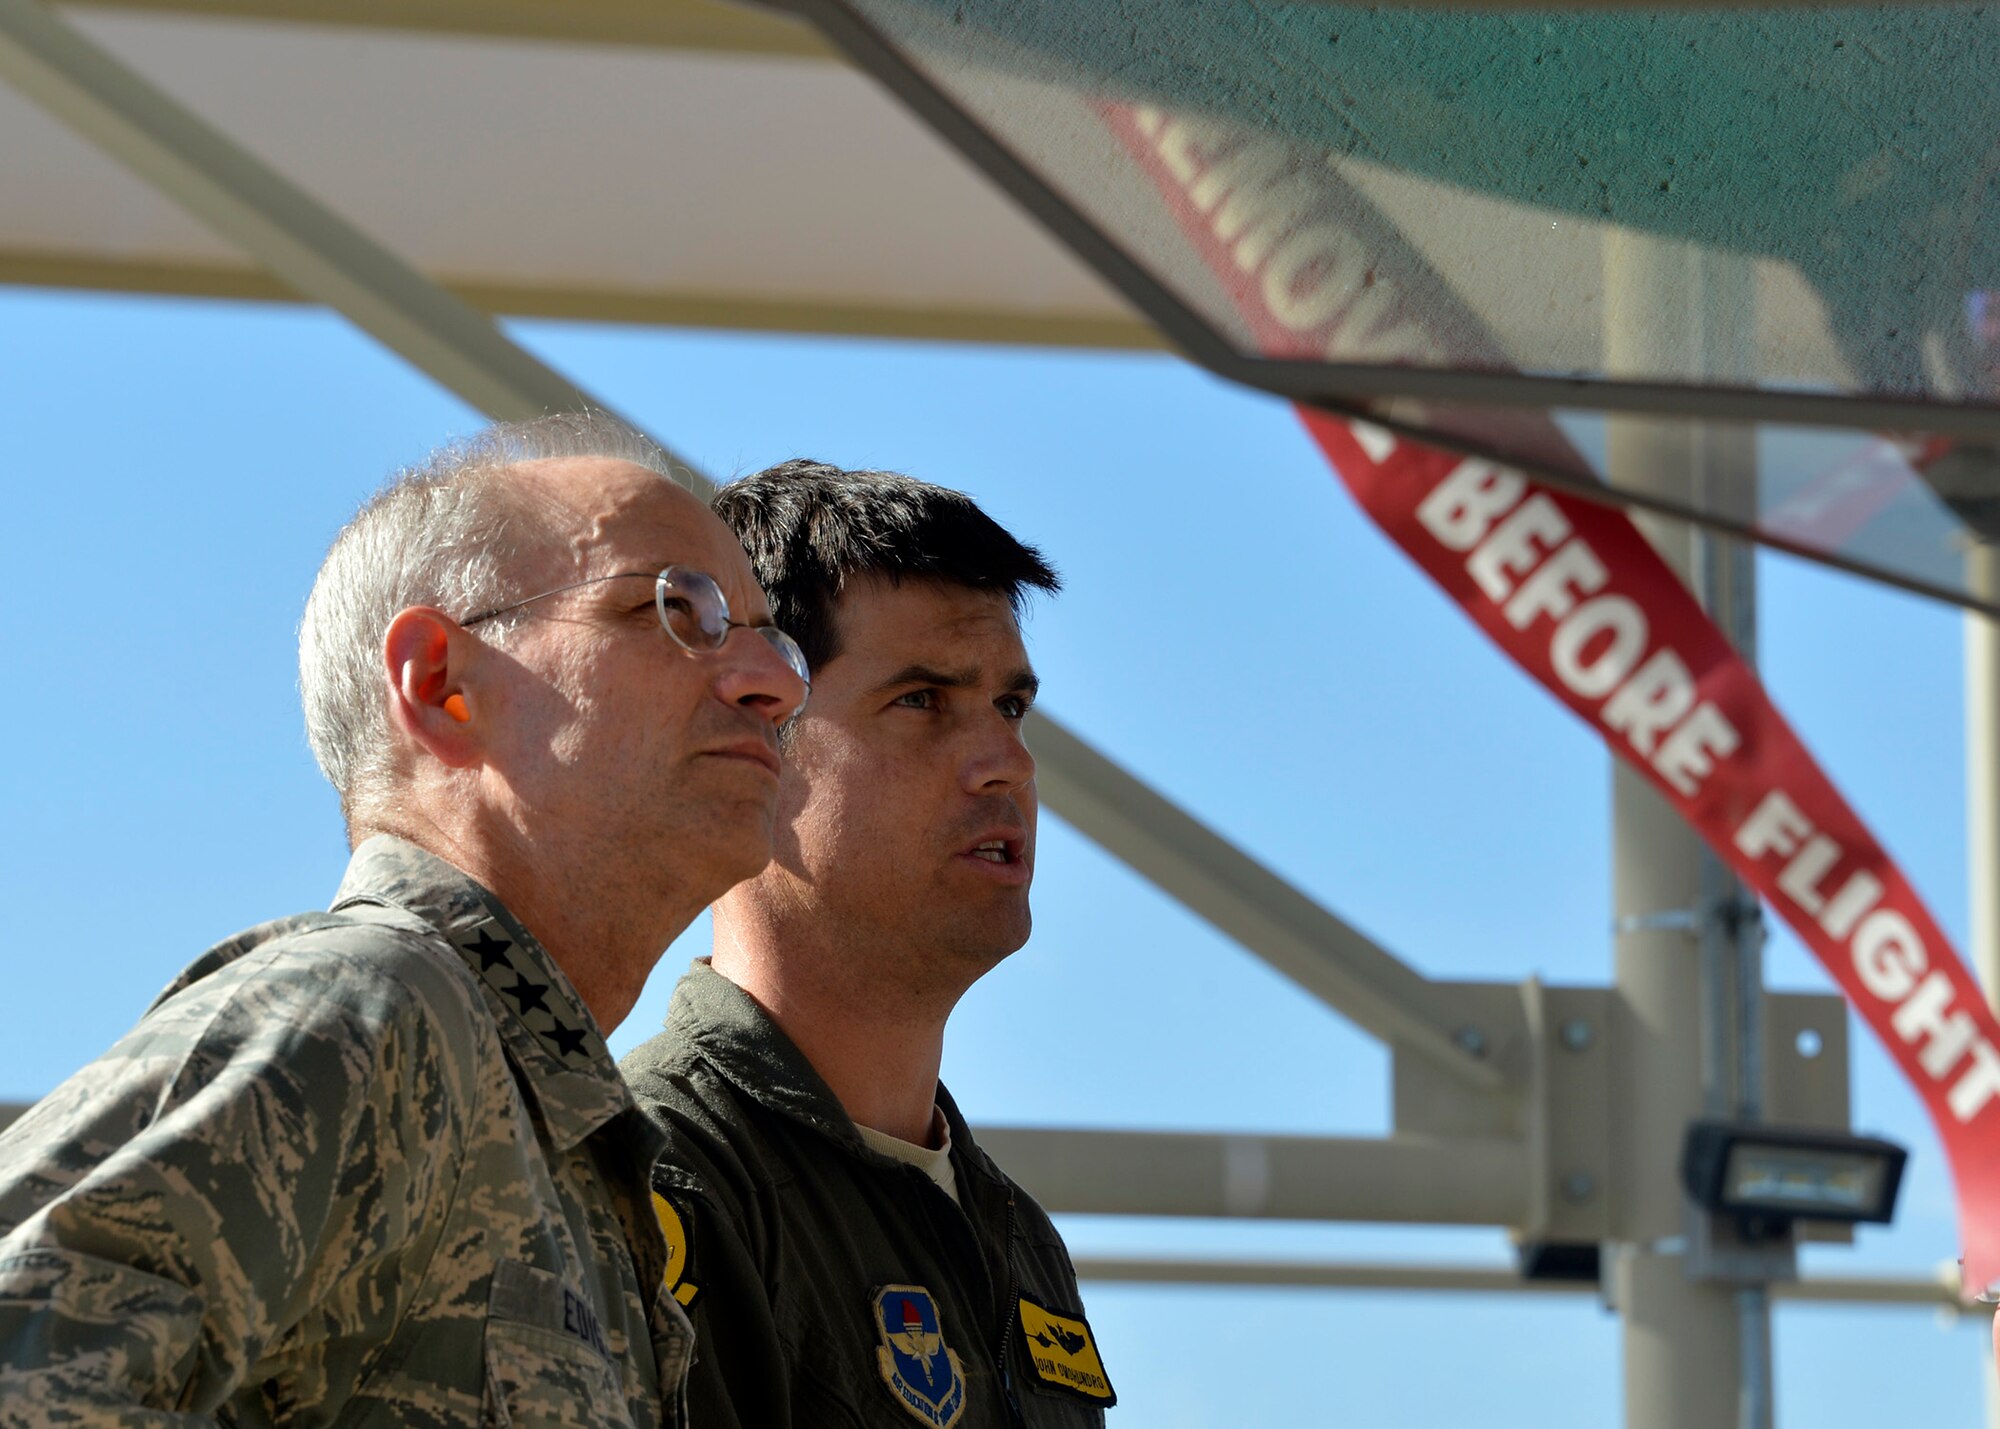 Maj. John Omohundro, 61st Fighter Squadron pilot, shows Lt. Gen. Mark Ediger, Headquarters U.S. Air Force Surgeon General, the F-35A Lightning II during a site visit at Luke Air Force Base, Ariz., Oct. 11, 2017. Ediger visited Luke to see the new renovations to the 56th MDG and how they support the F-35A Lightning II mission. (U.S. Air Force photo by Senior Airman Devante Williams)